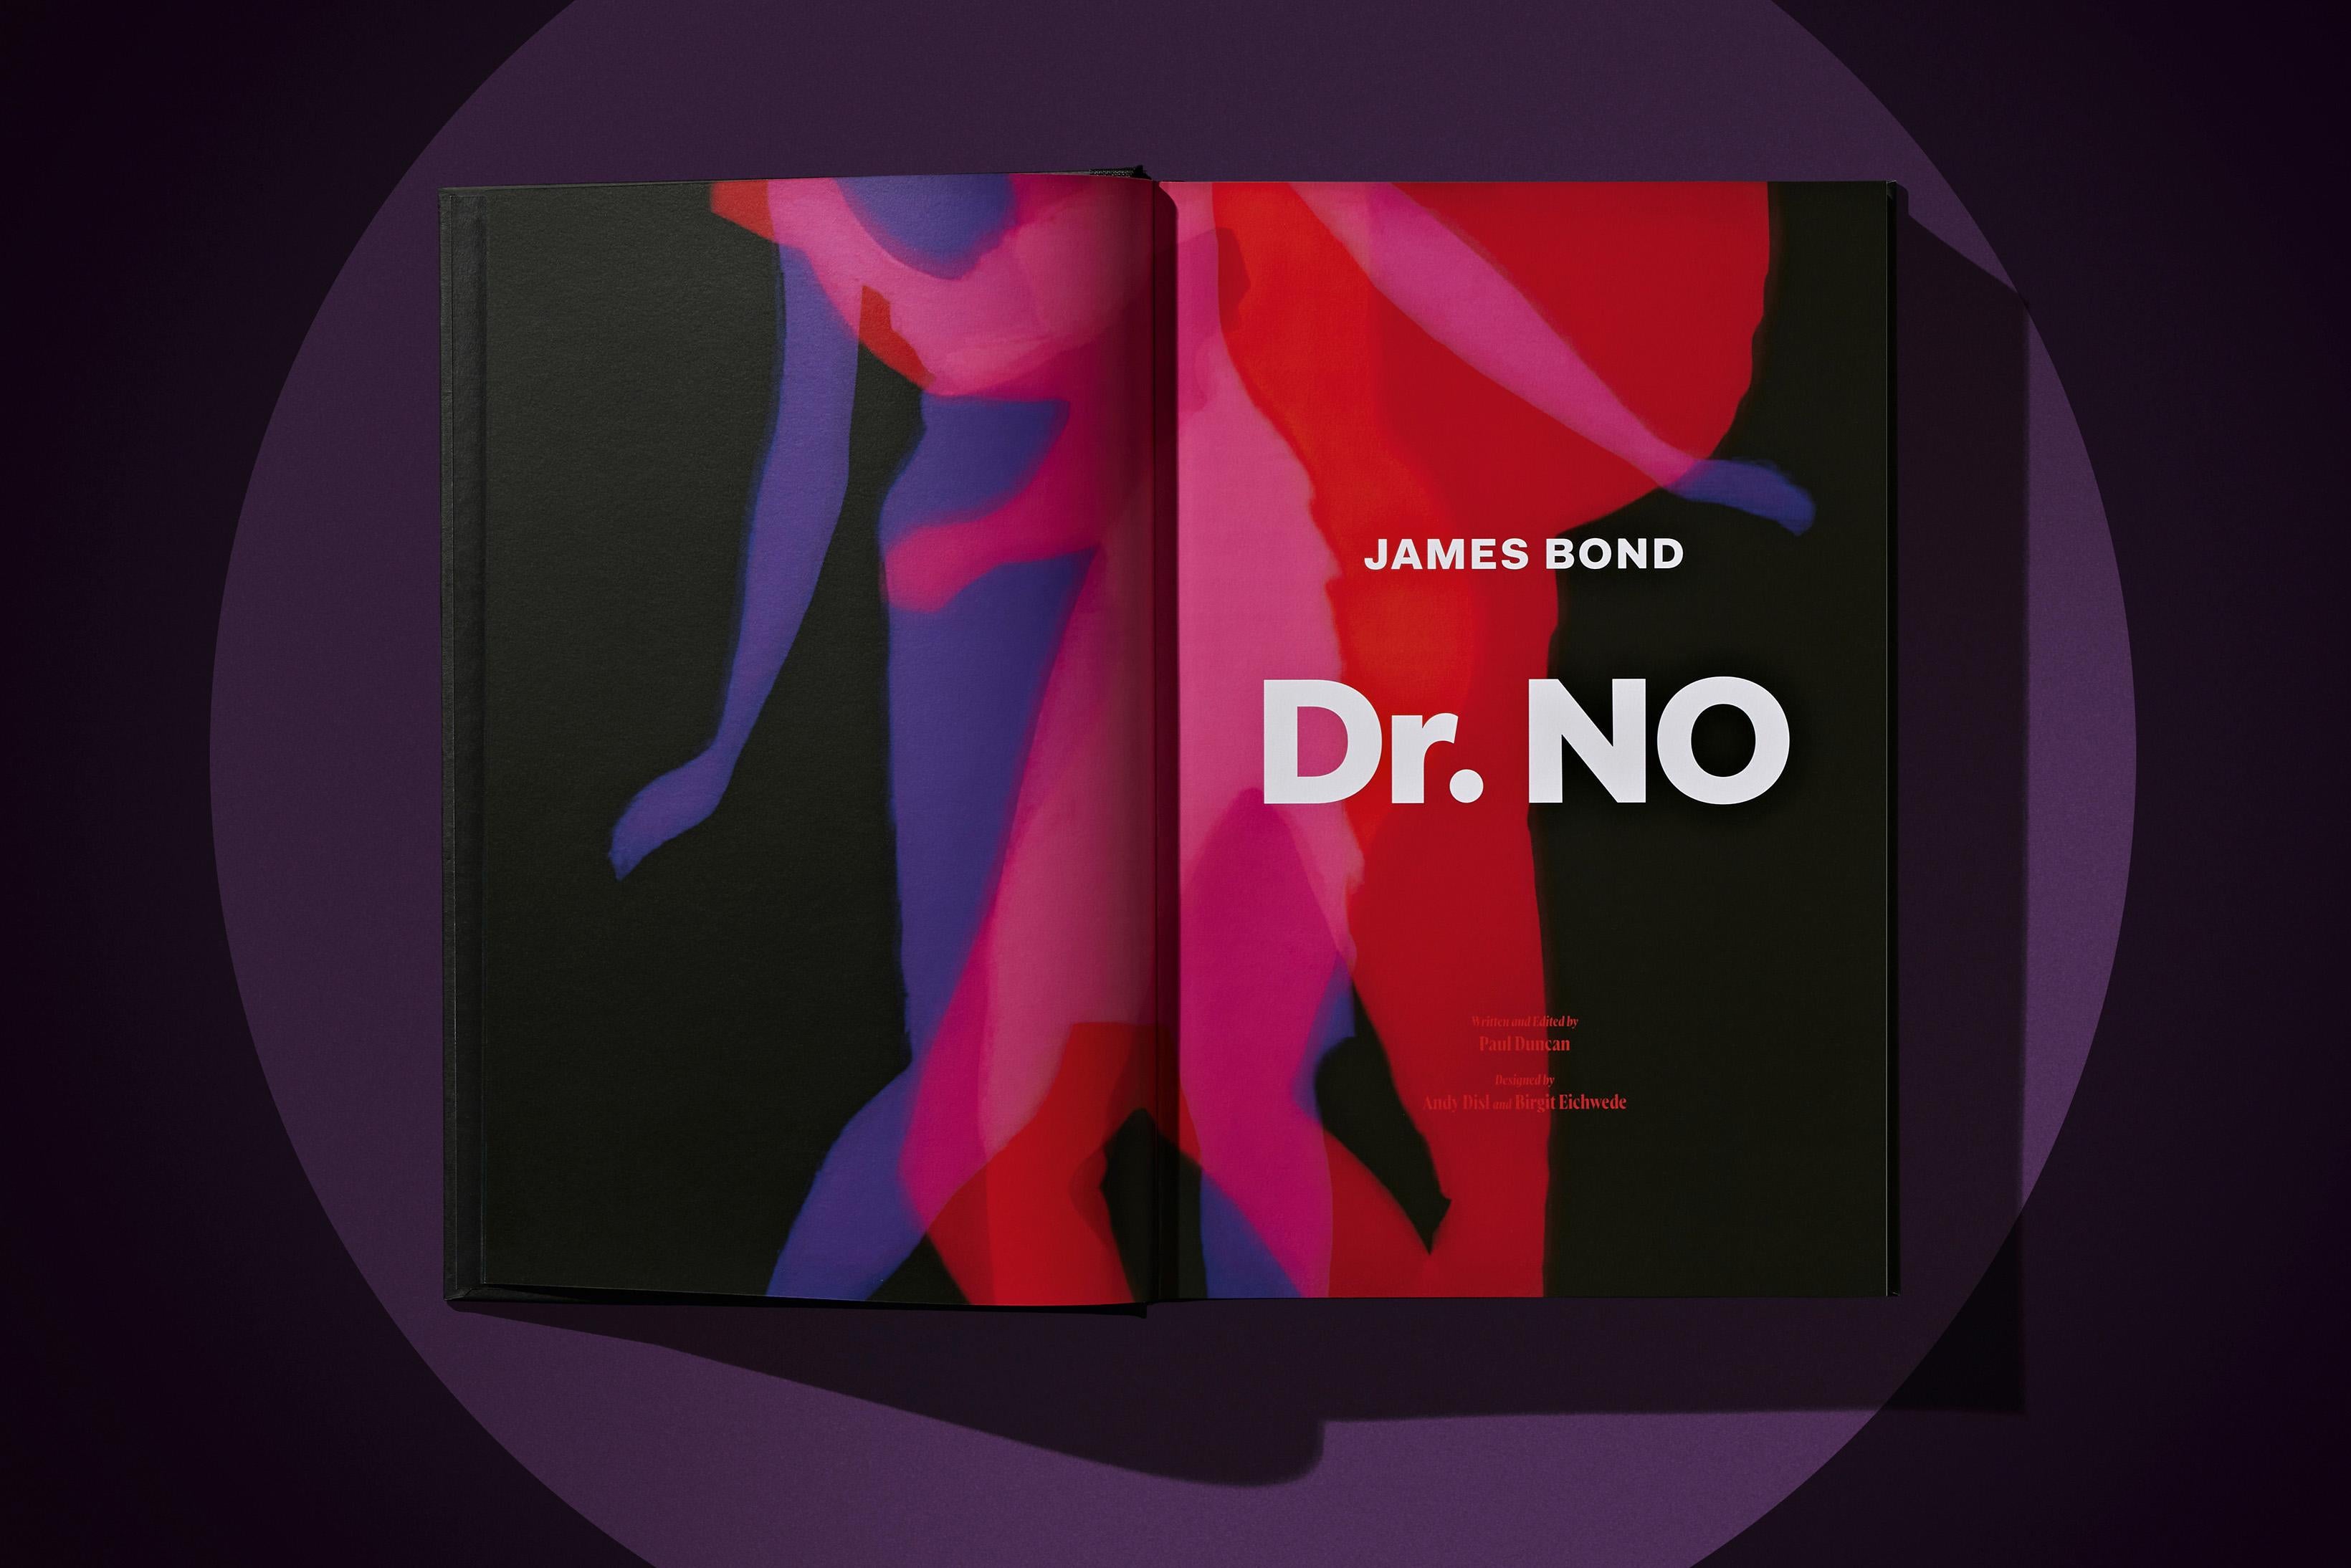 James Bond. Dr. No. Limited Edition Collector's Book. im Angebot 6